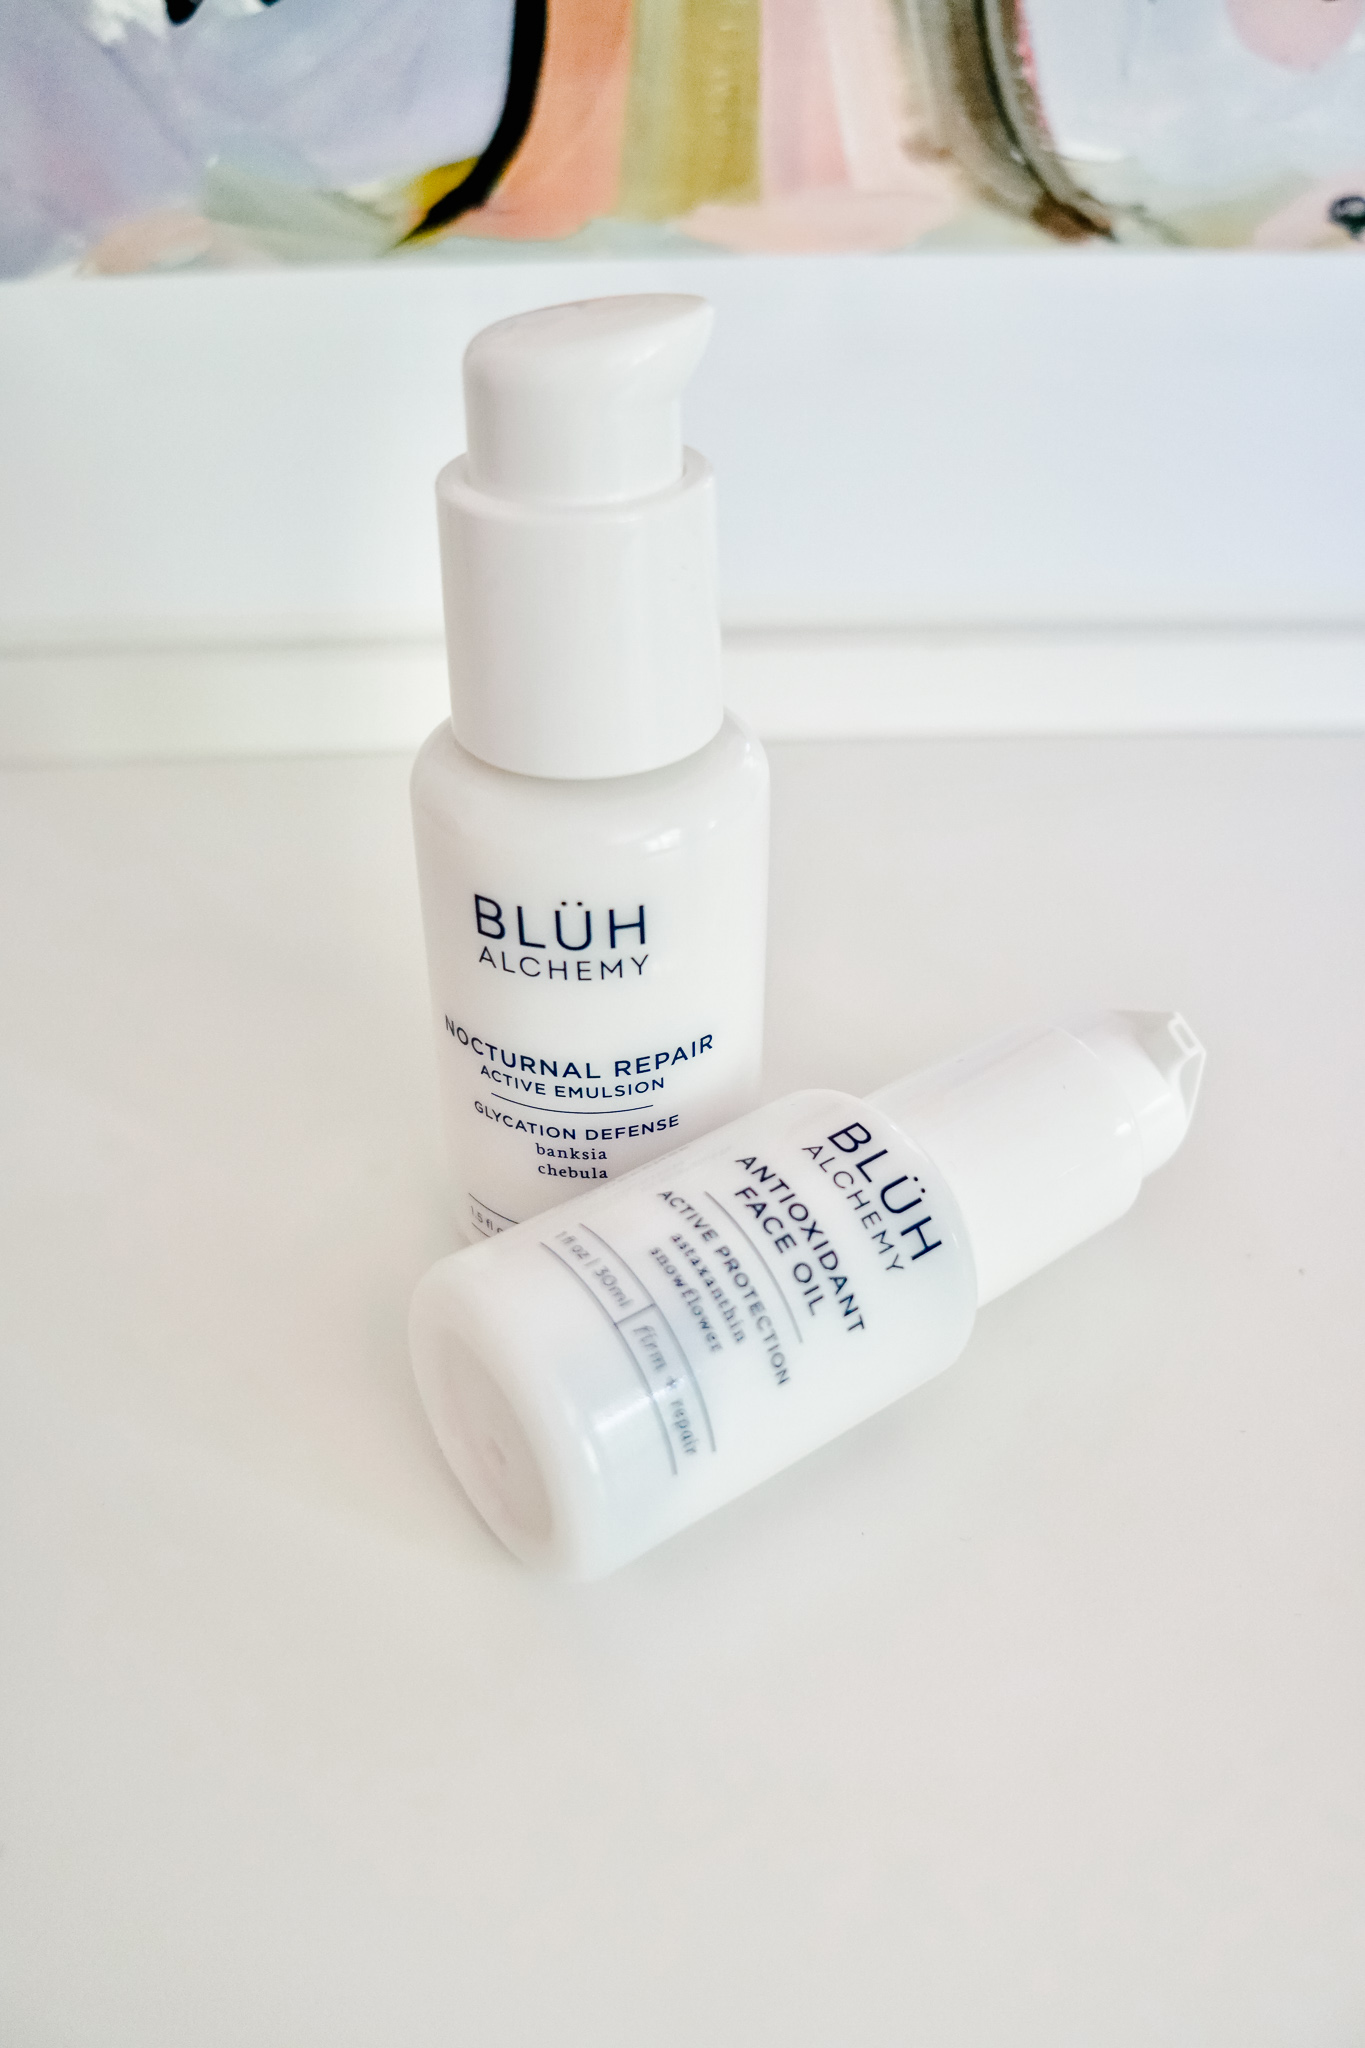 Sharing the June Beauty Heroes with BLÜH ALCHEMY